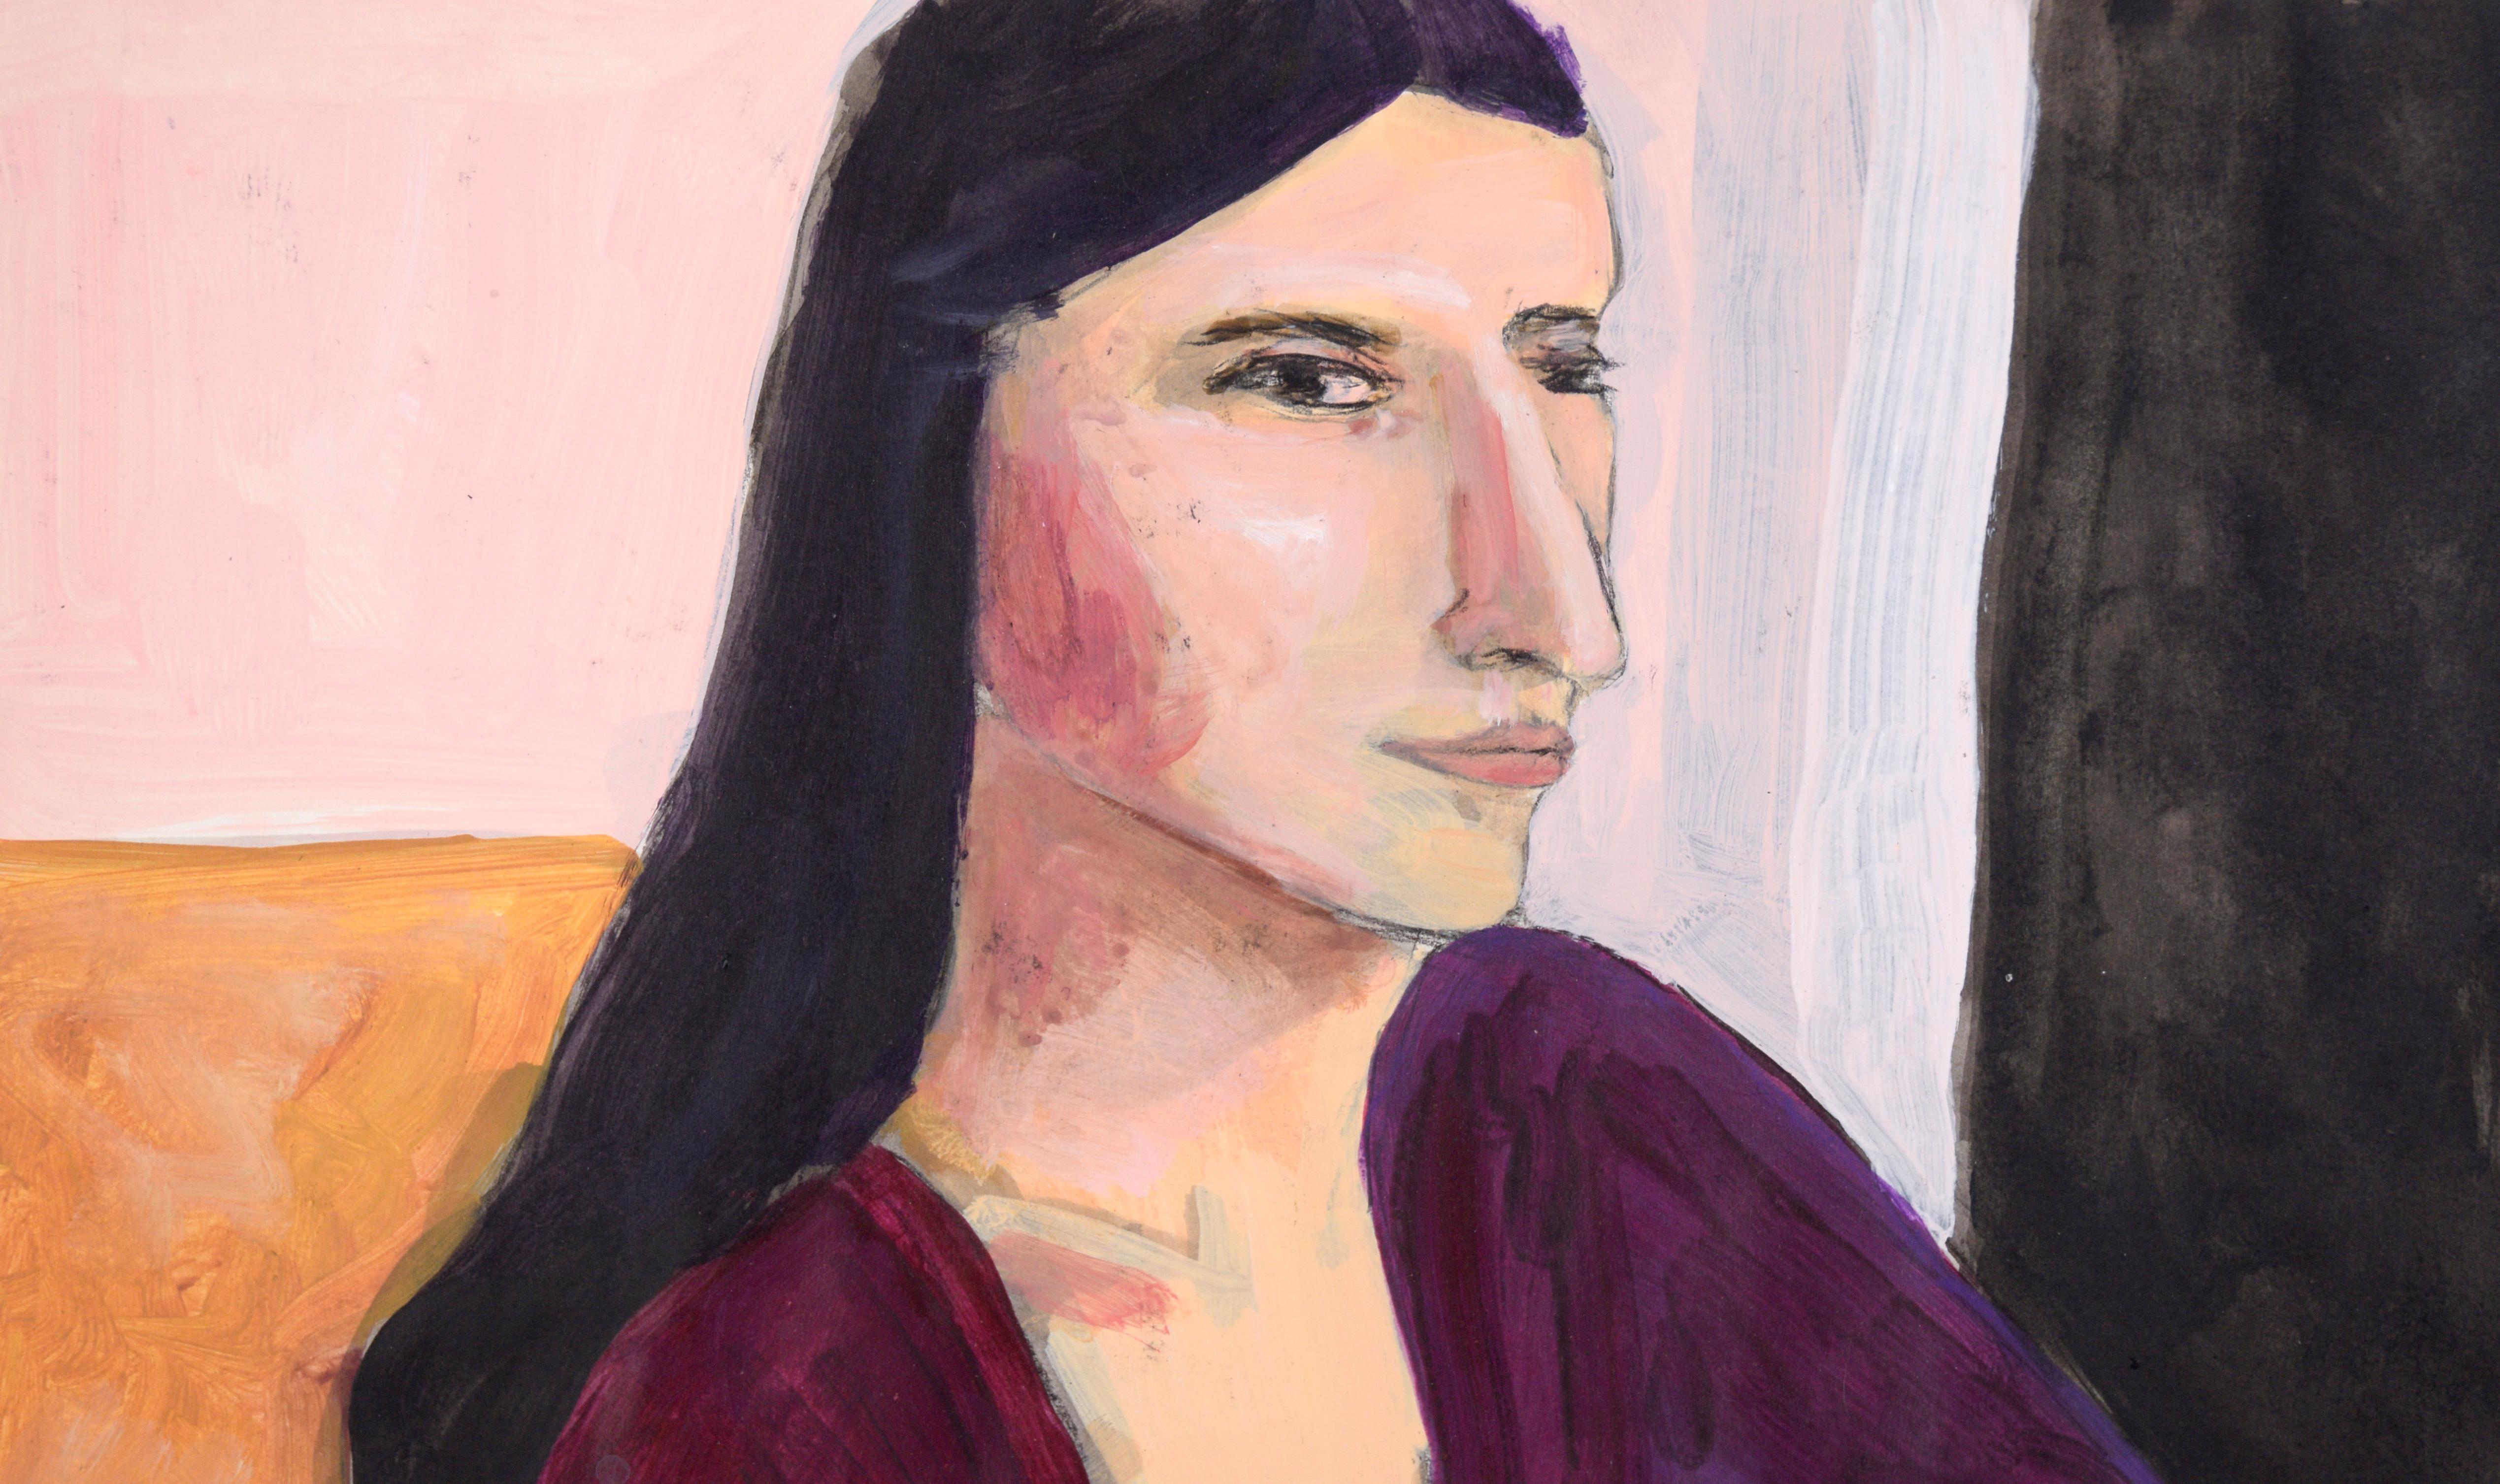 Portrait of a Woman with Dark Hair in a Purple Dress in Acrylic on Paper - Painting by Katherine Kallick